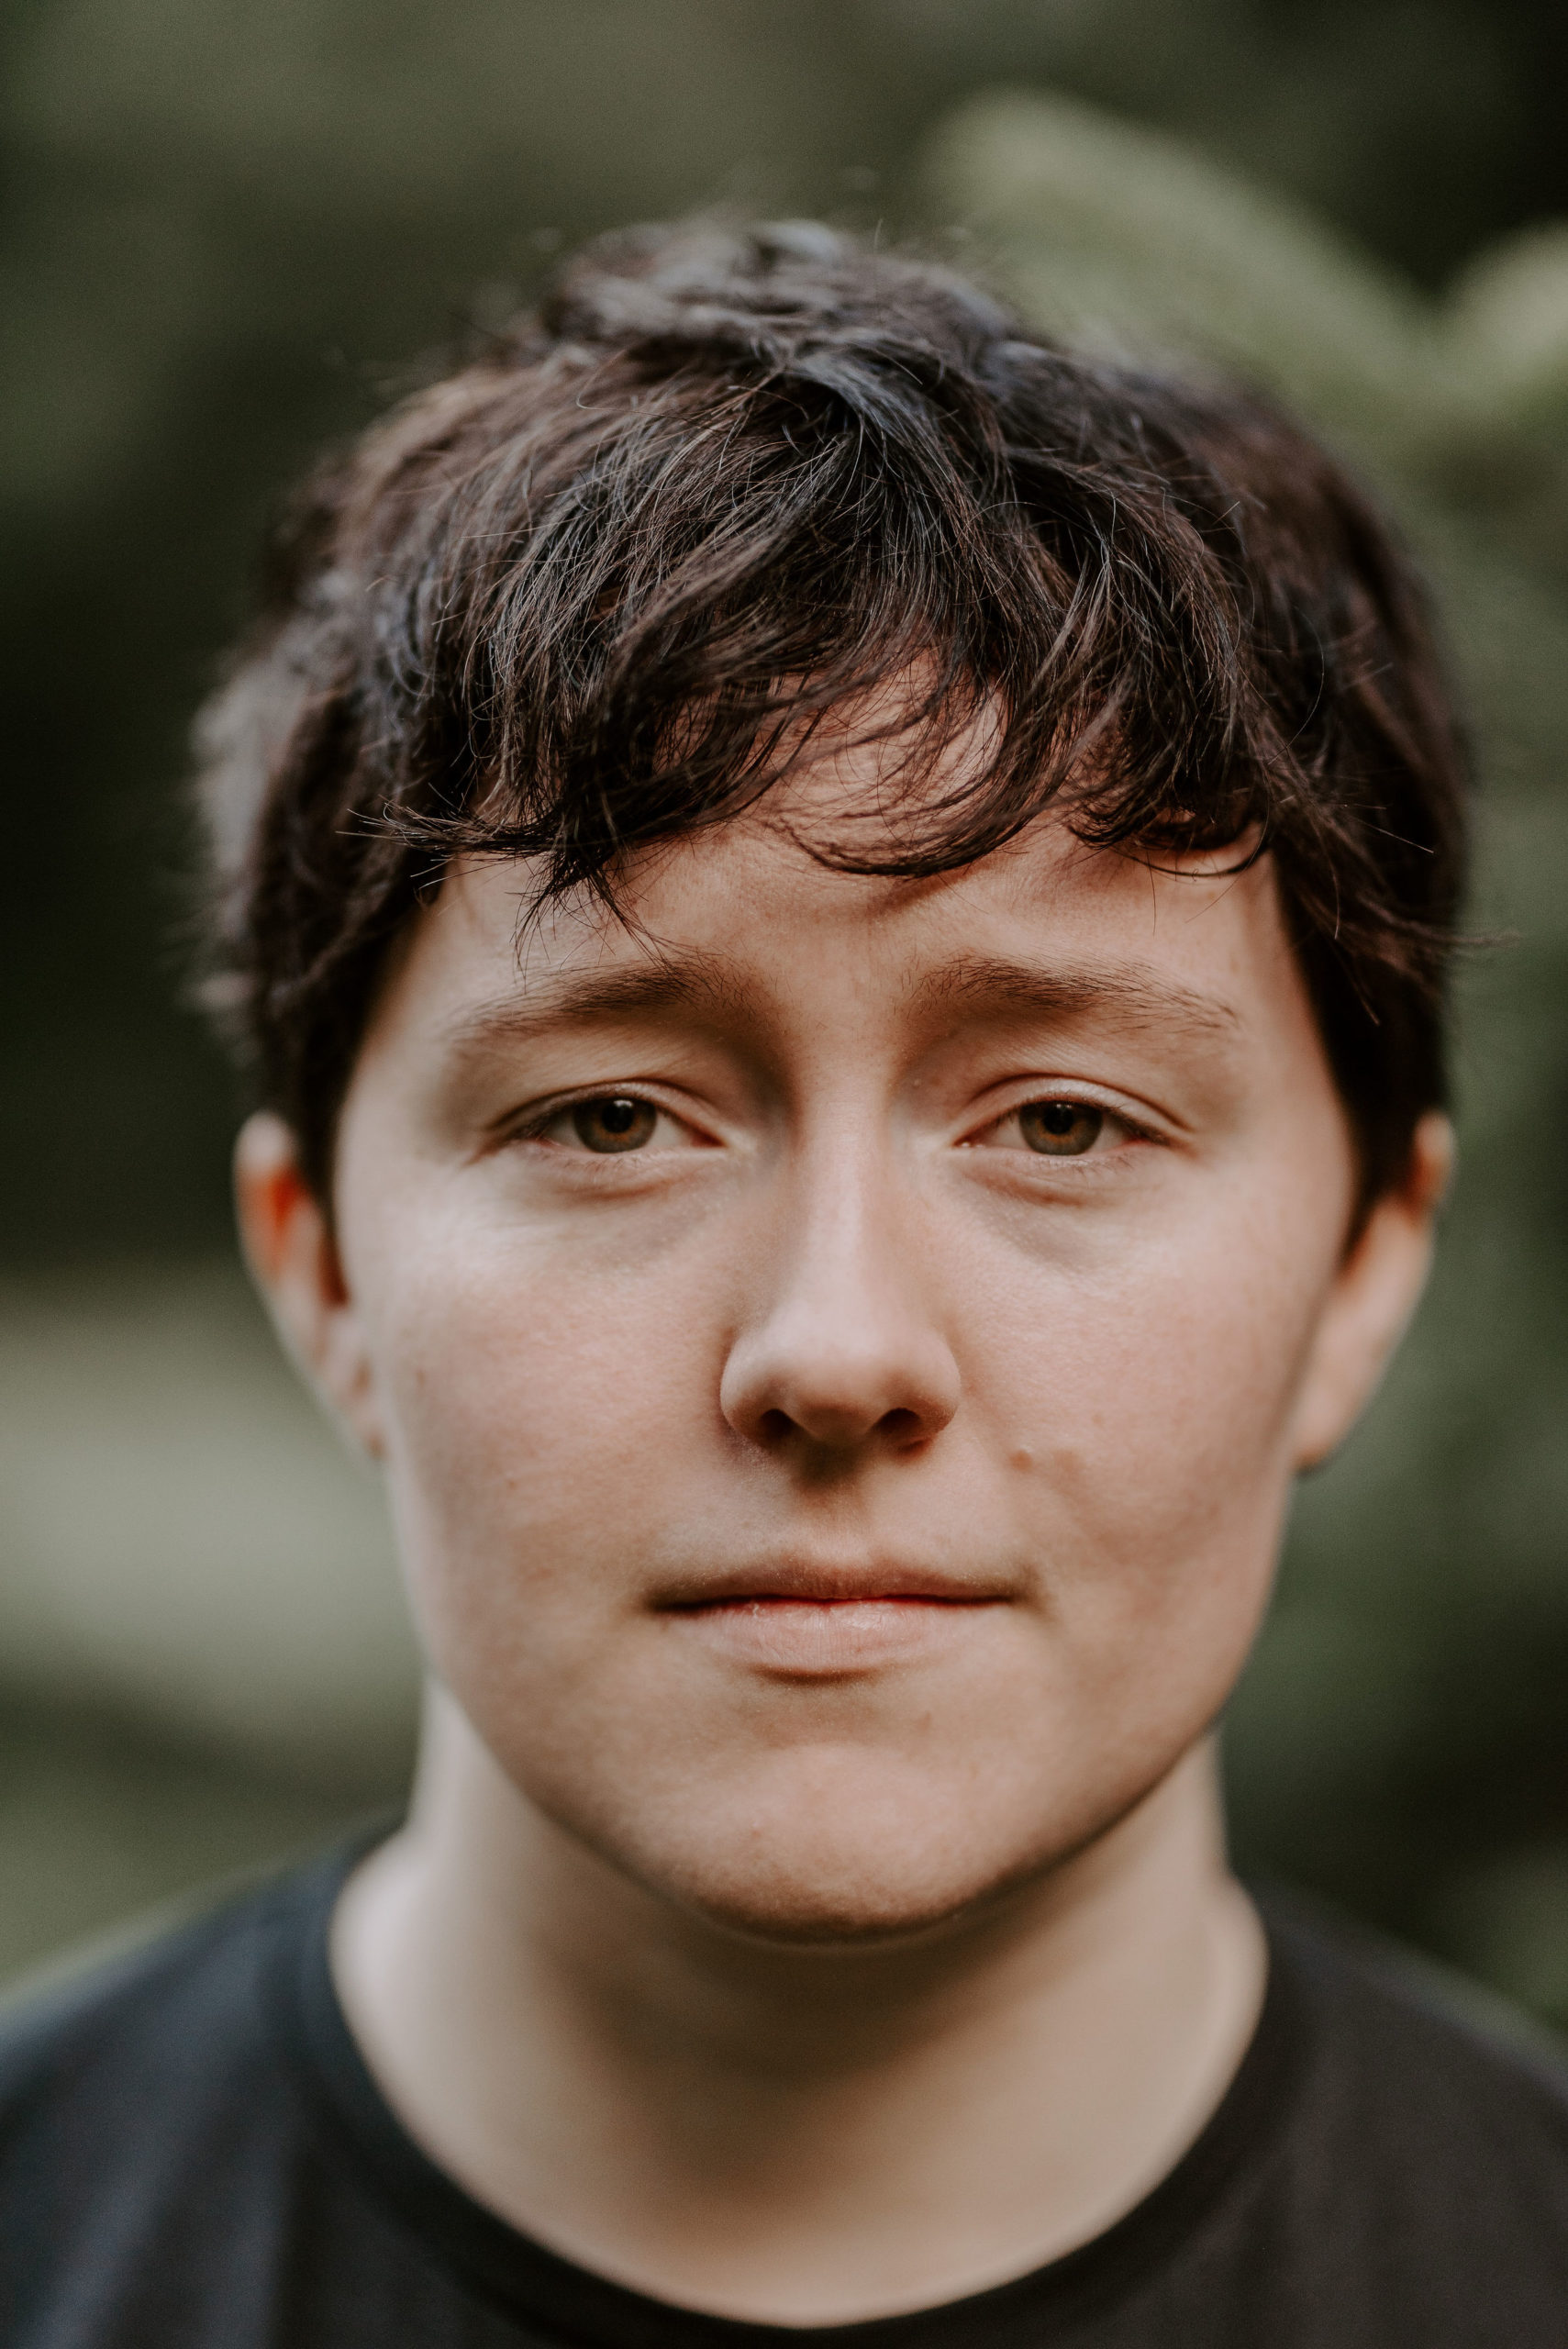 Niamh is a non-binary/trans-masc person in their early 20’s. They are white, with short dark brown hair. They are wearing a plain black t-shirt and stood in front of a blurred green background.